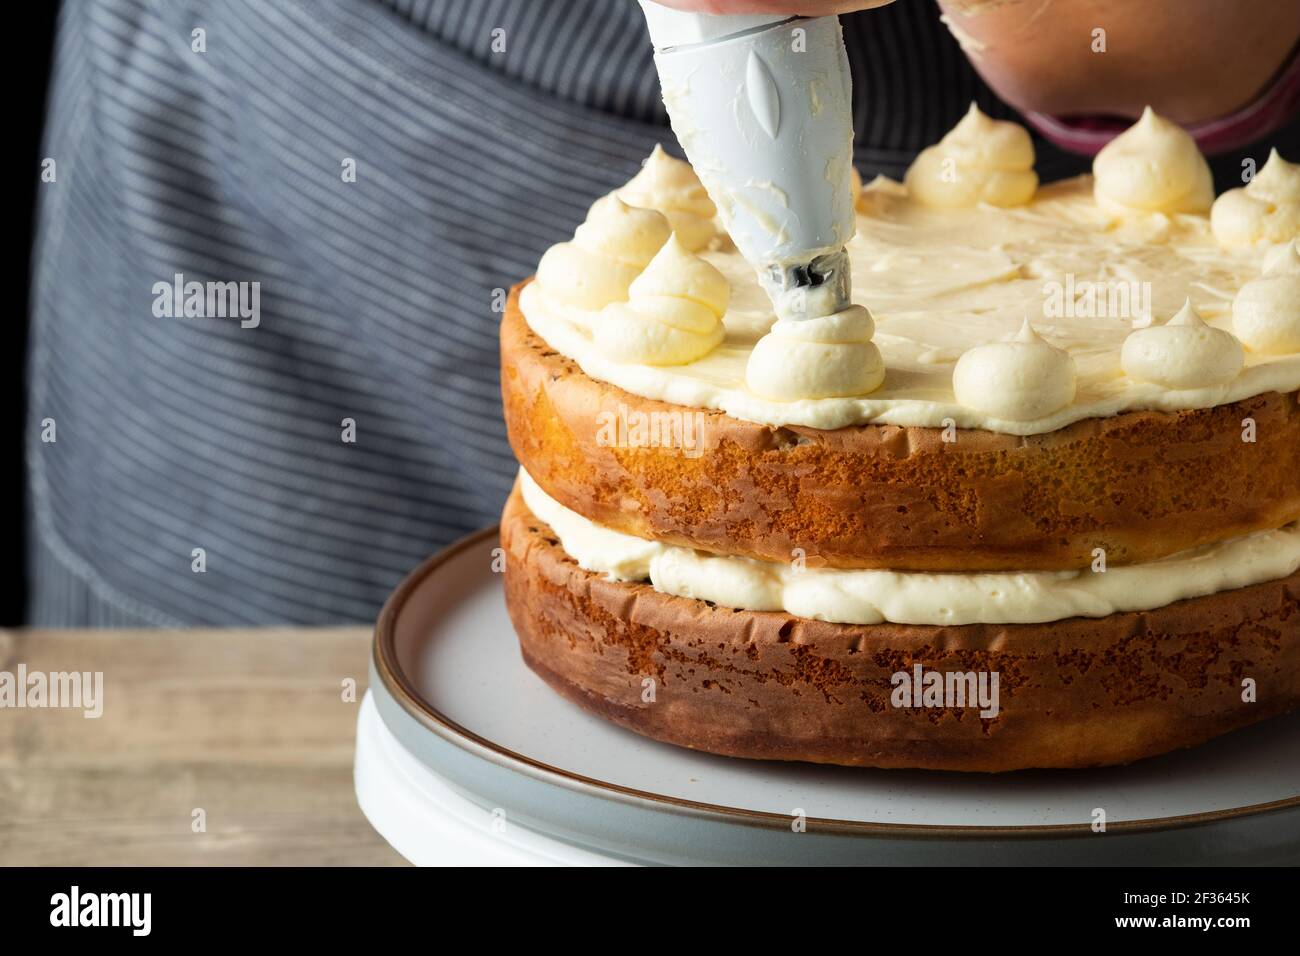 https://c8.alamy.com/comp/2F3645K/a-baker-adds-butter-cream-to-the-top-of-a-freshly-home-baked-cake-the-baker-a-female-is-skilfully-adding-the-butter-cream-using-a-piping-bag-2F3645K.jpg